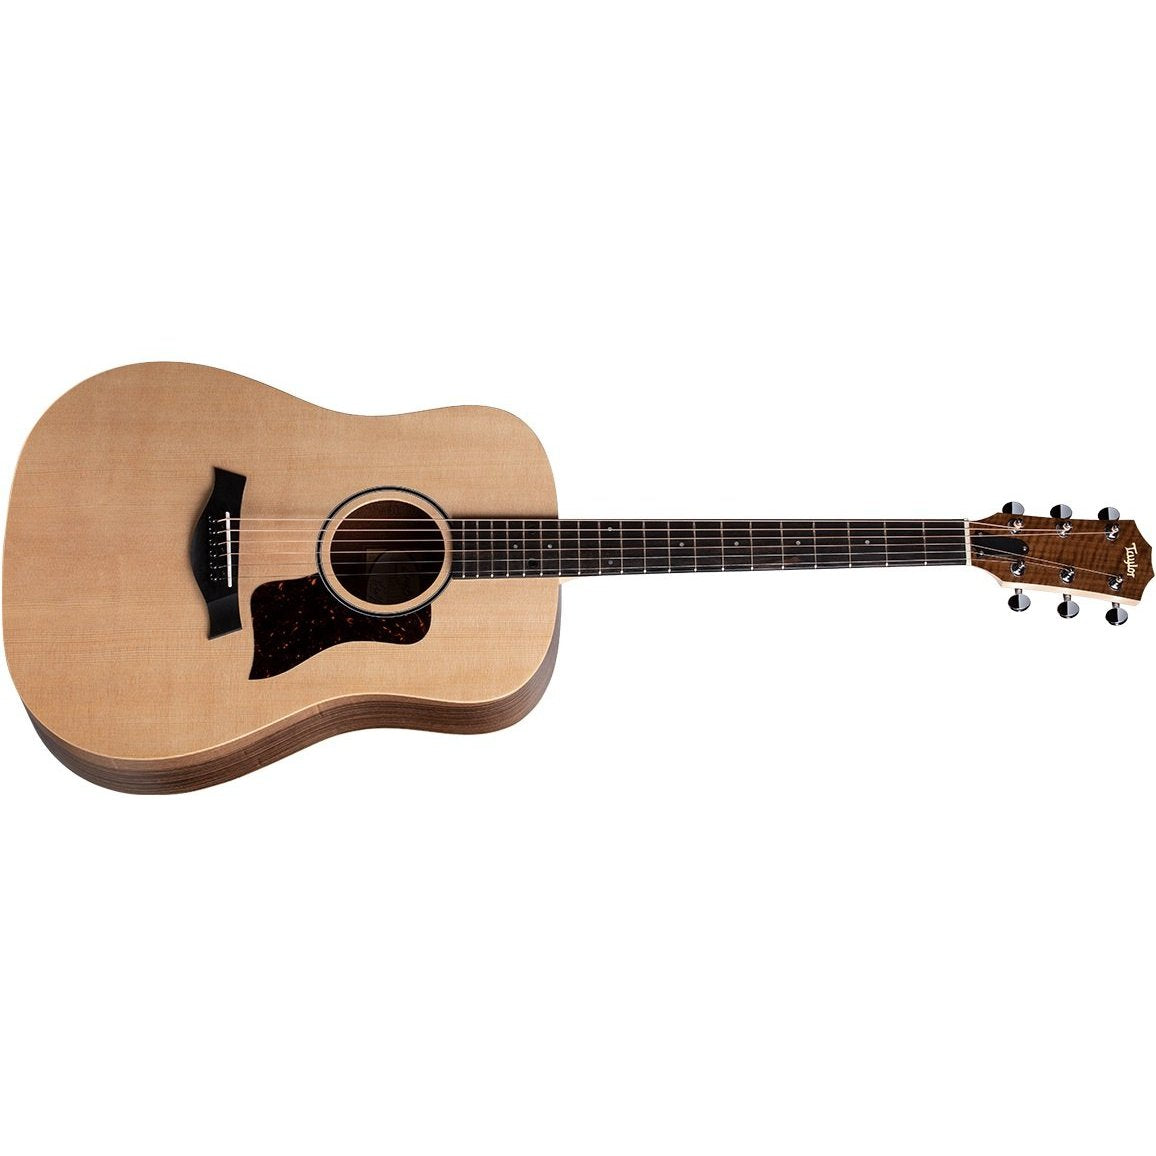 Taylor BBTE Big Baby Acoustic/Electric Guitar-Natural with Gig Bag-Music World Academy